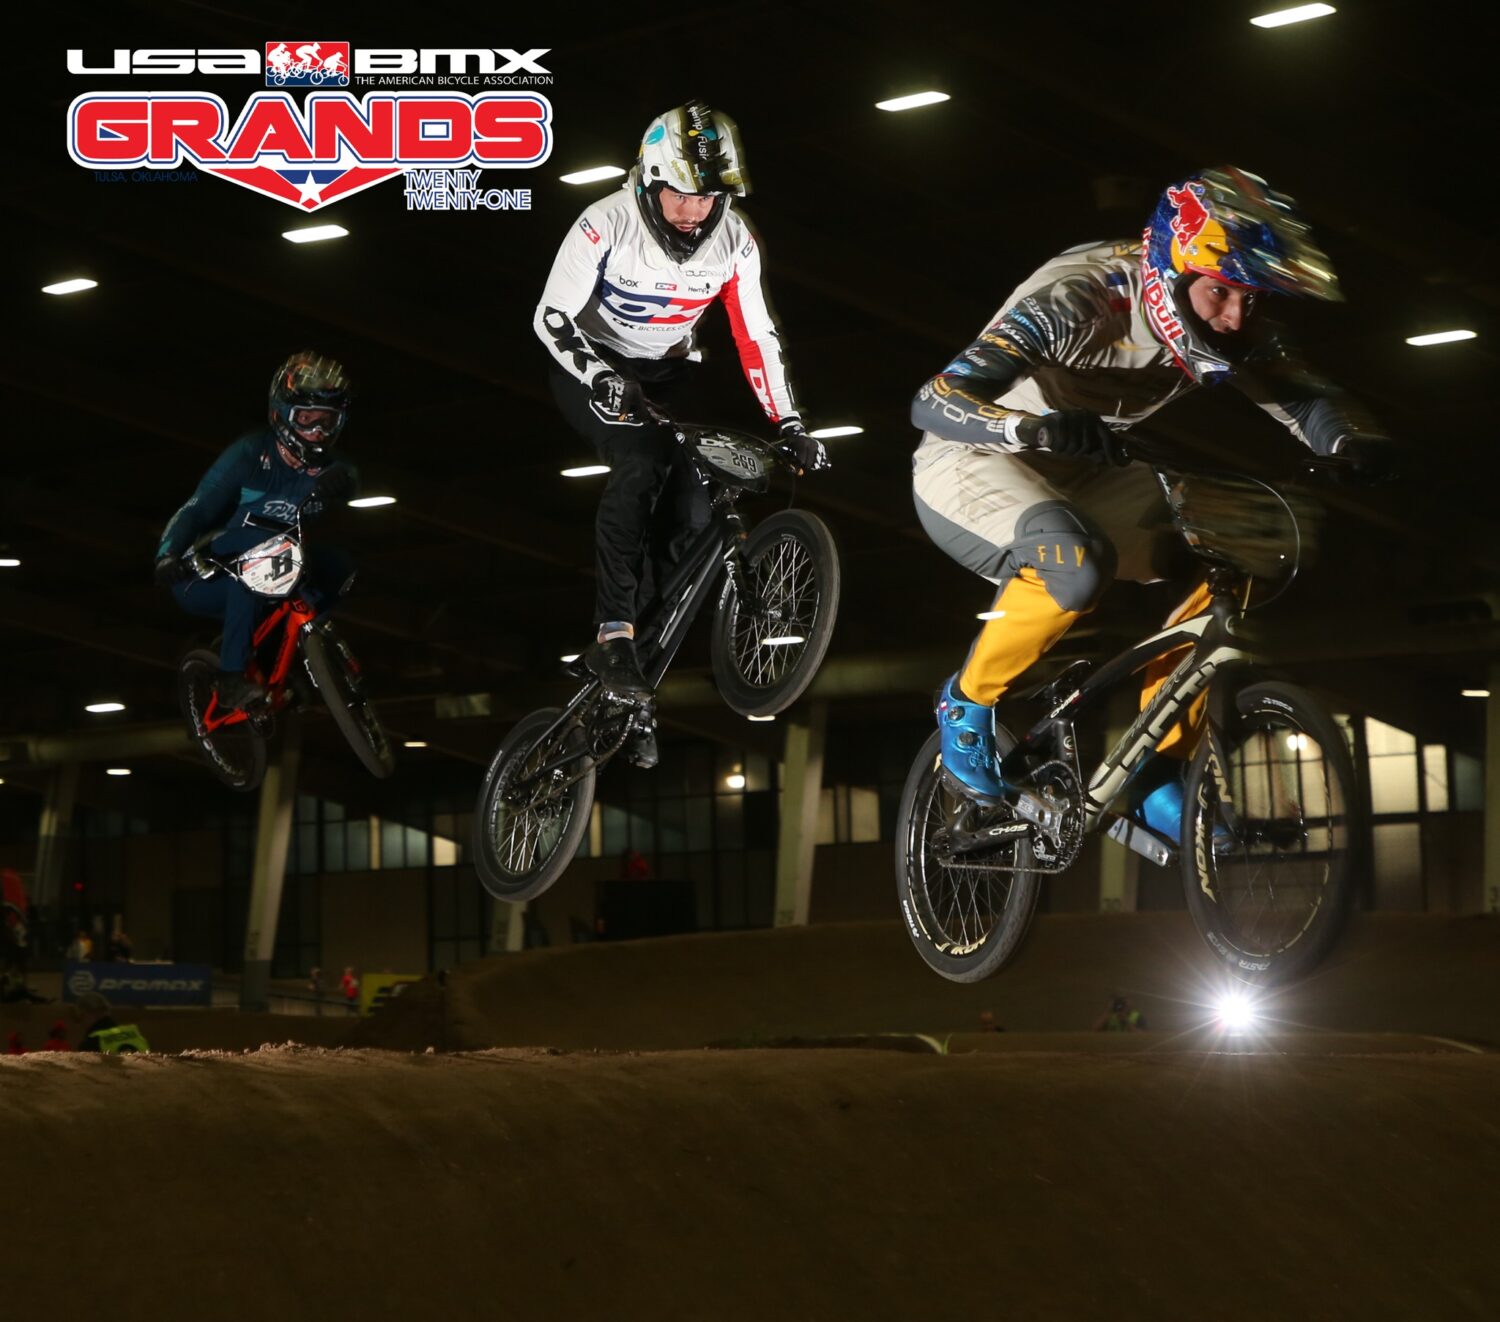 Joris Daudet wins the USA BMX Grand National Main event and the 2021 USA BMX #1 Pro title. This marks Joris 4th USA BMX #1 Pro Title, pitting him in the history books with great riders such as Gary Ellis and Pete Loncarovich, all wining 4 USA BMX Pro Titles.